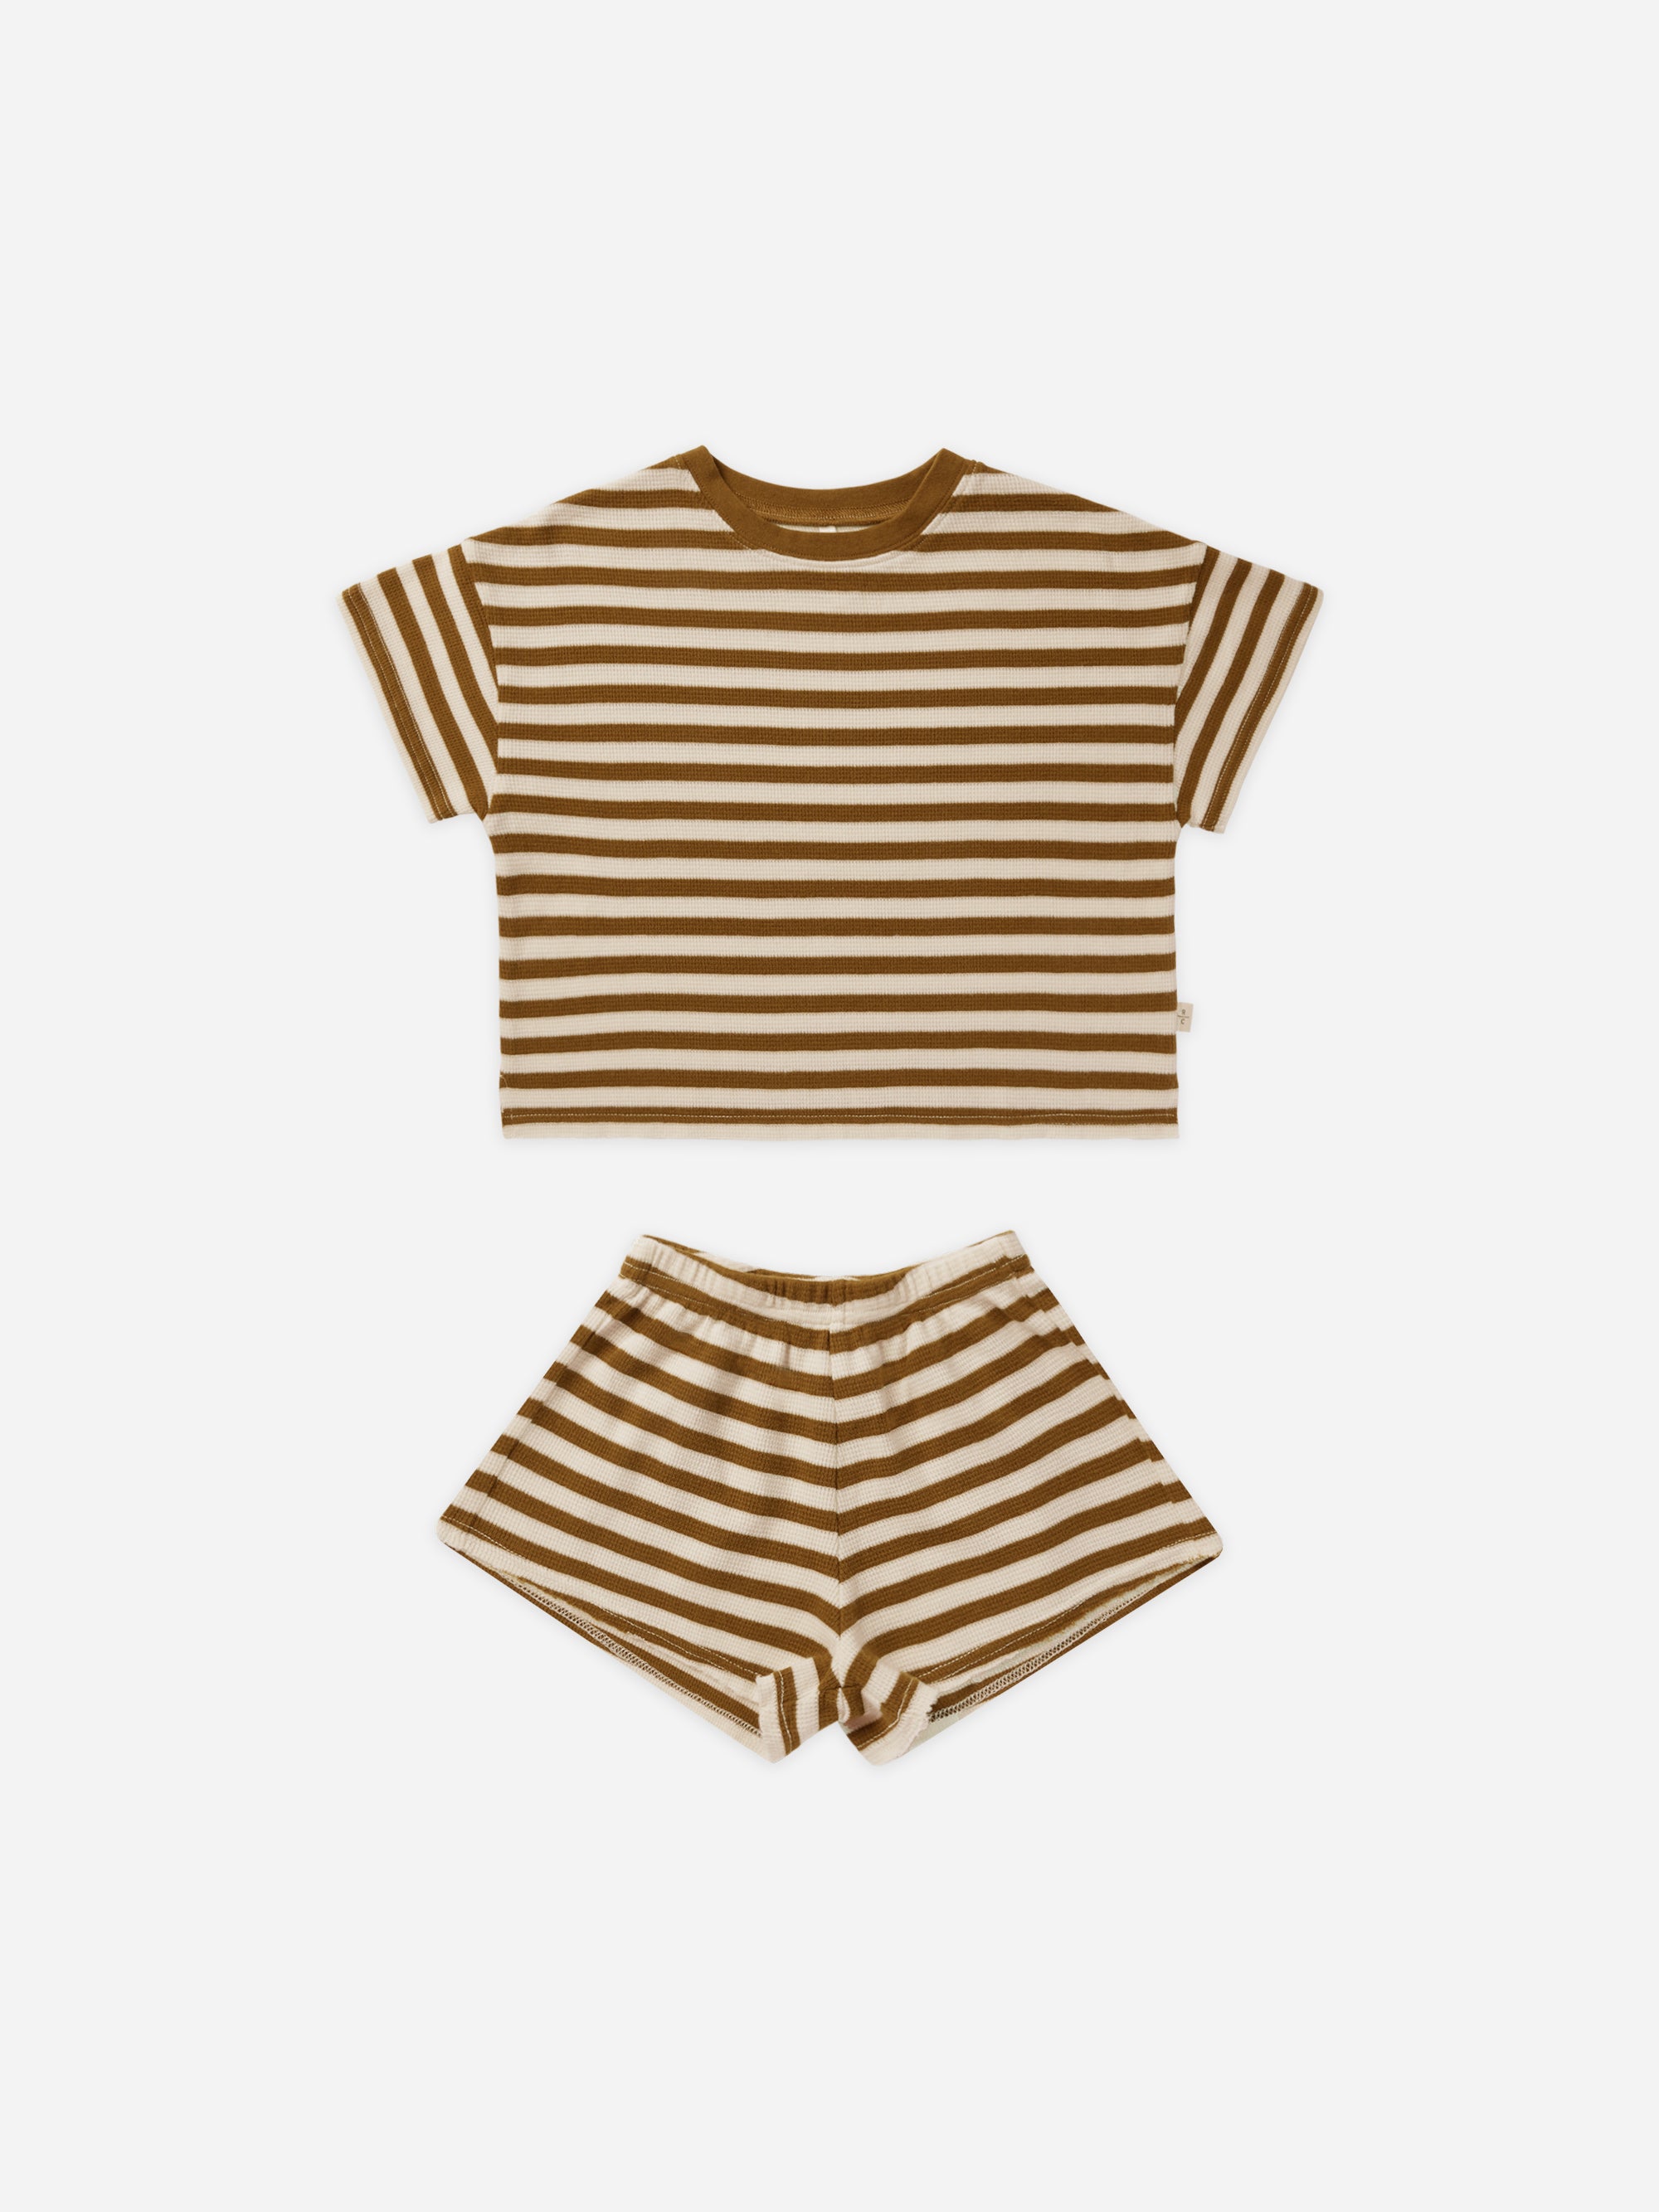 Summer Waffle Set || Saddle Stripe - Rylee + Cru | Kids Clothes | Trendy Baby Clothes | Modern Infant Outfits |